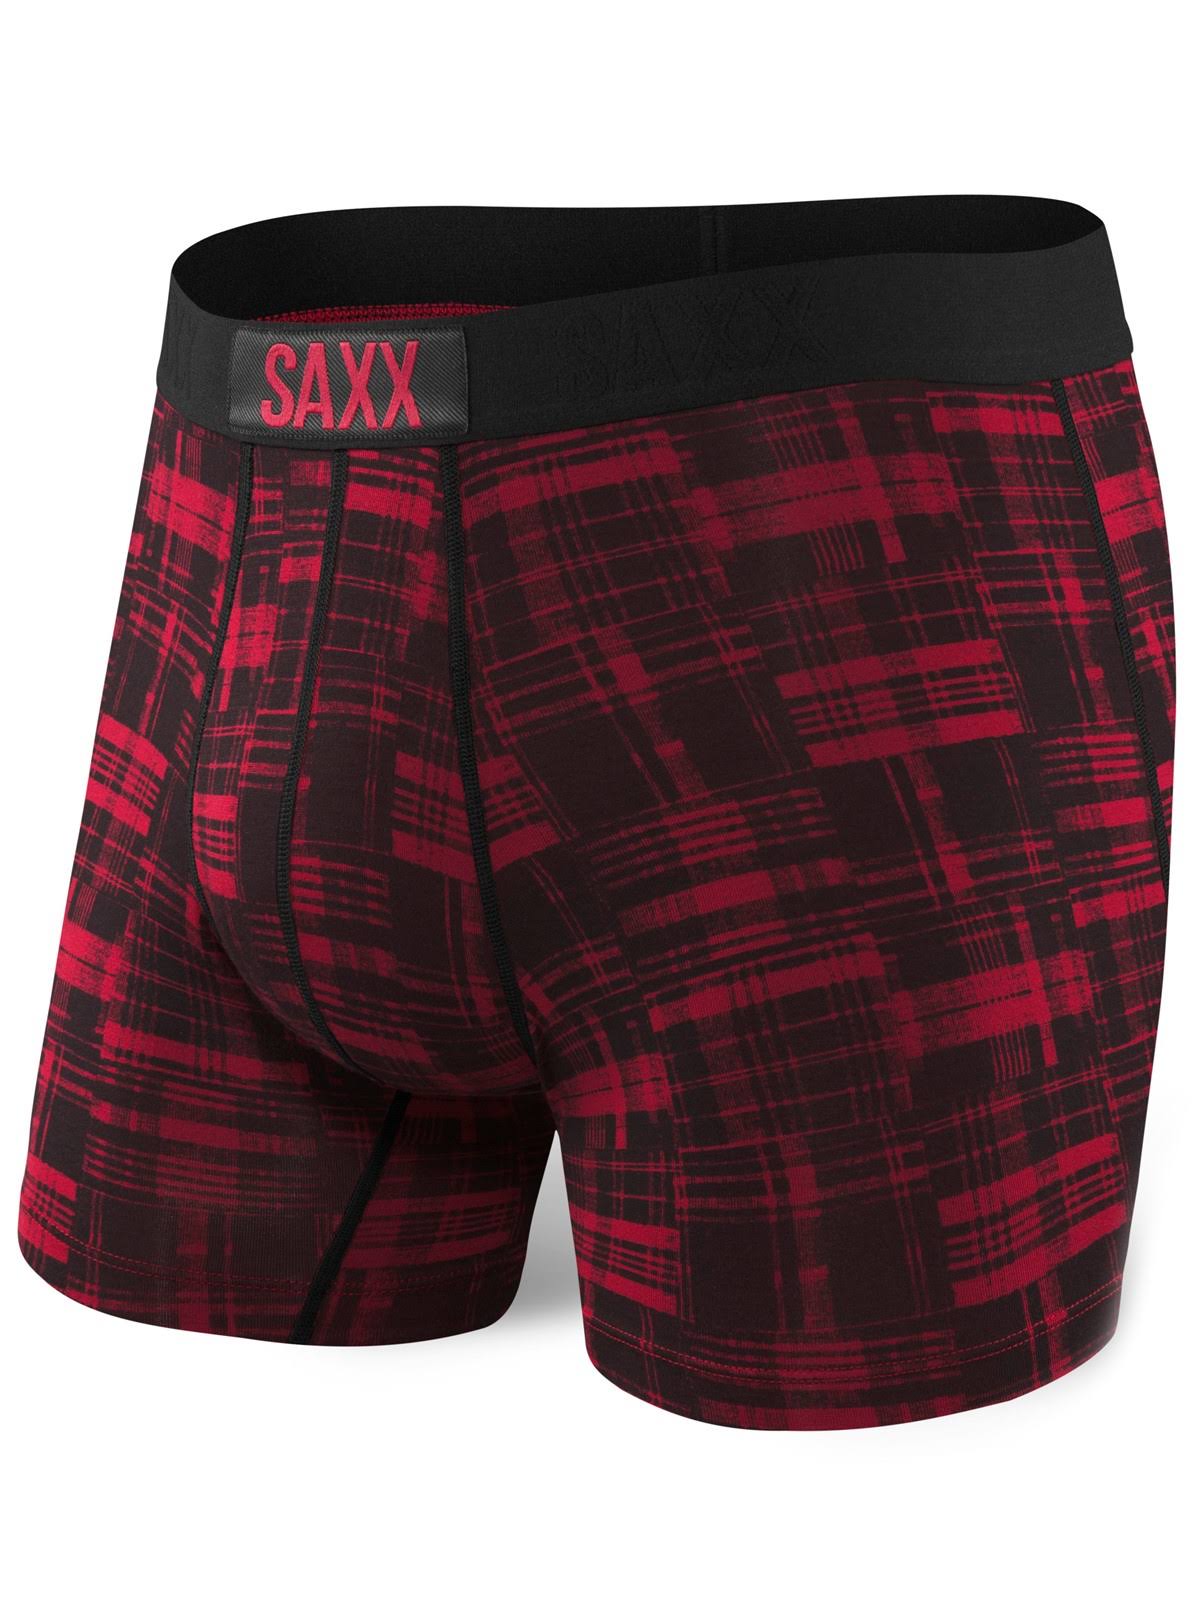 SAXX Vibe Boxer Brief - Large Red Patched Plaid | Underwear